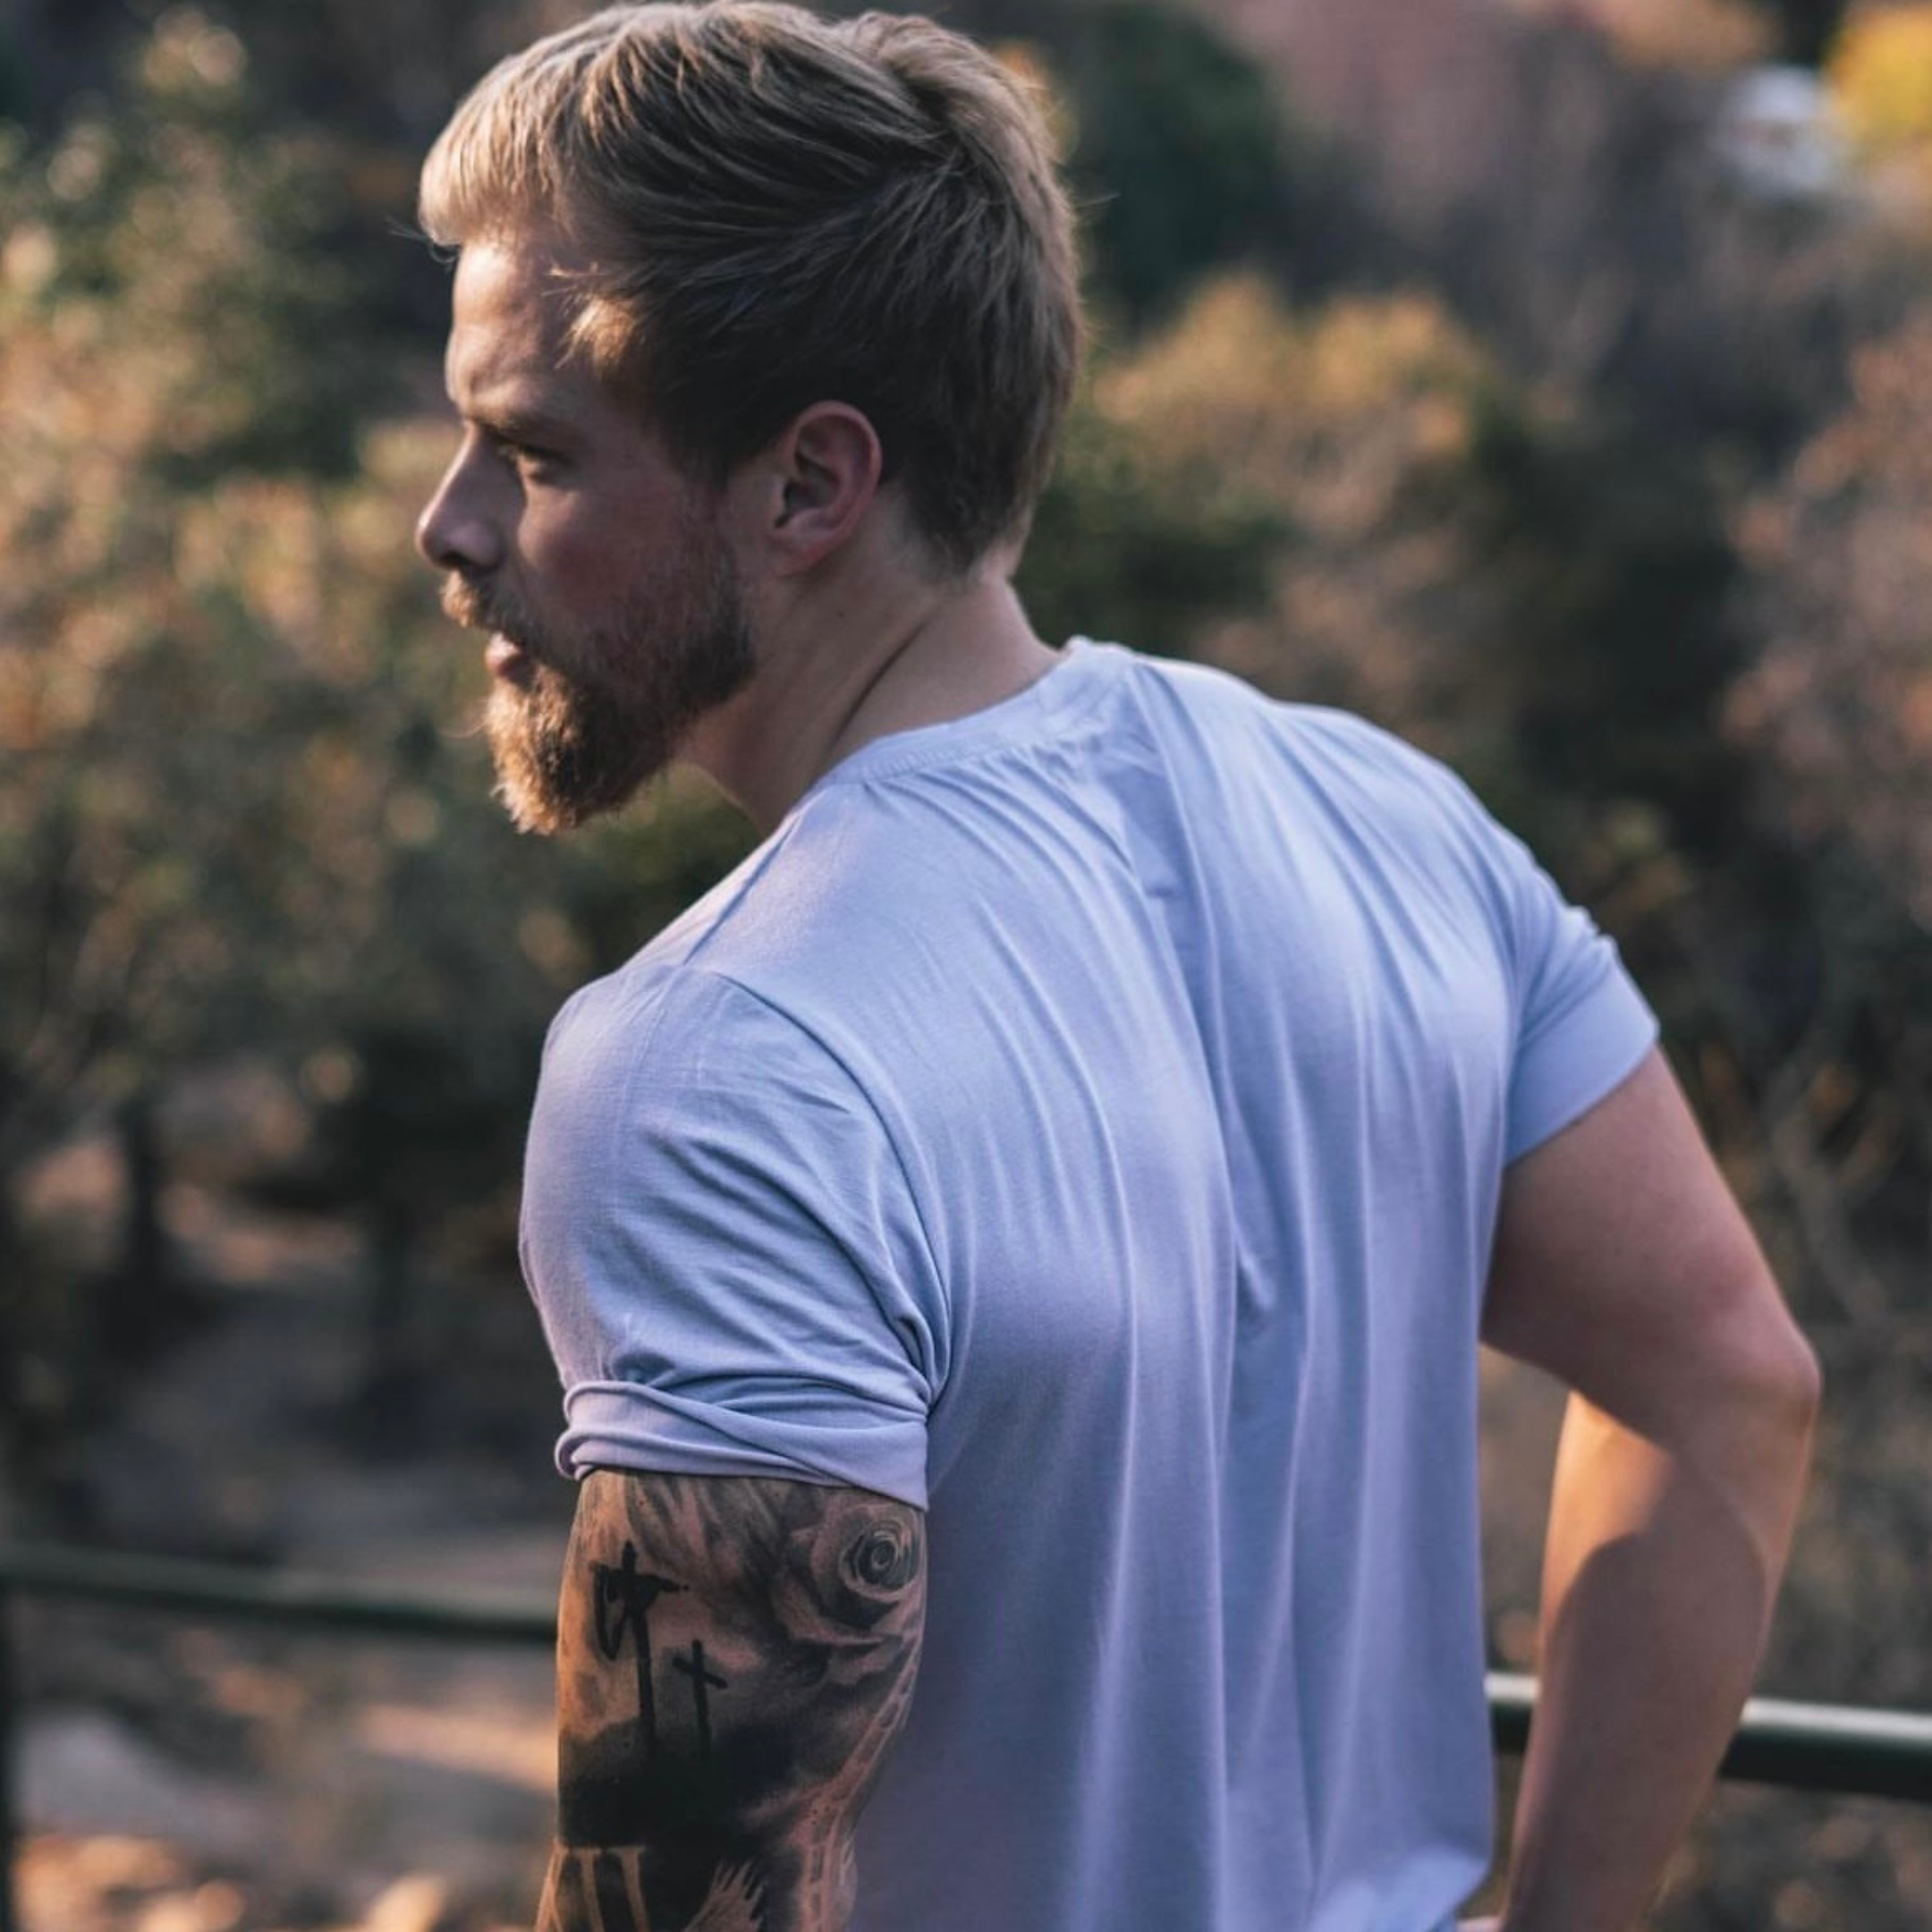 Rolled Muscle Tee - IndigoStrange ParadiseKingsofculture
Our Rolled Muscle Tees are designed for everyday wear. Our fabric delivers a product for those with a demanding and versatile lifestyle. From the workplace or gym, Rolled Muscle Tee - Indigo